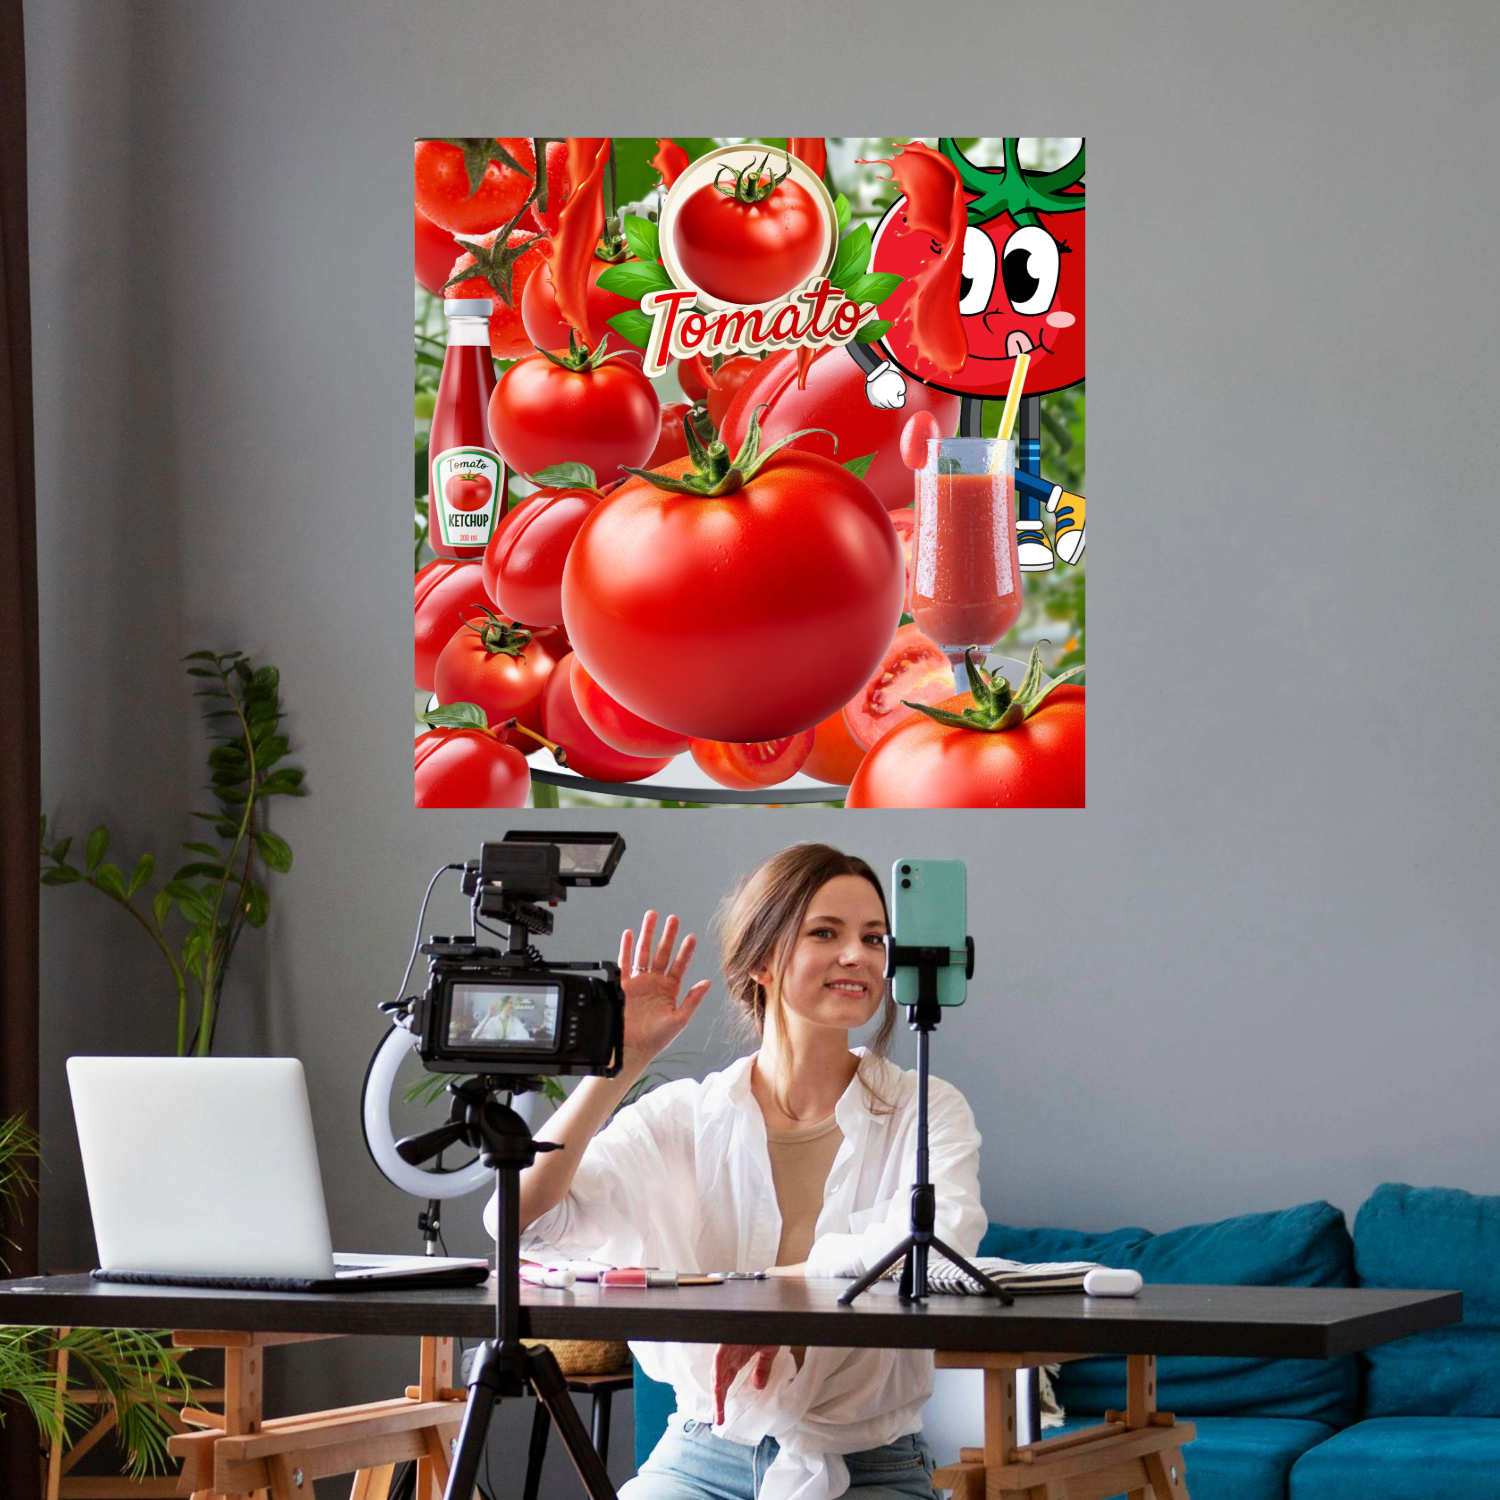 Wall Art TOMATOES Canvas Print Painting Original Giclee 32X32 GW Love Food Nice Beauty Fun Design Fit Hot House Home Office Gift Ready Hang Living